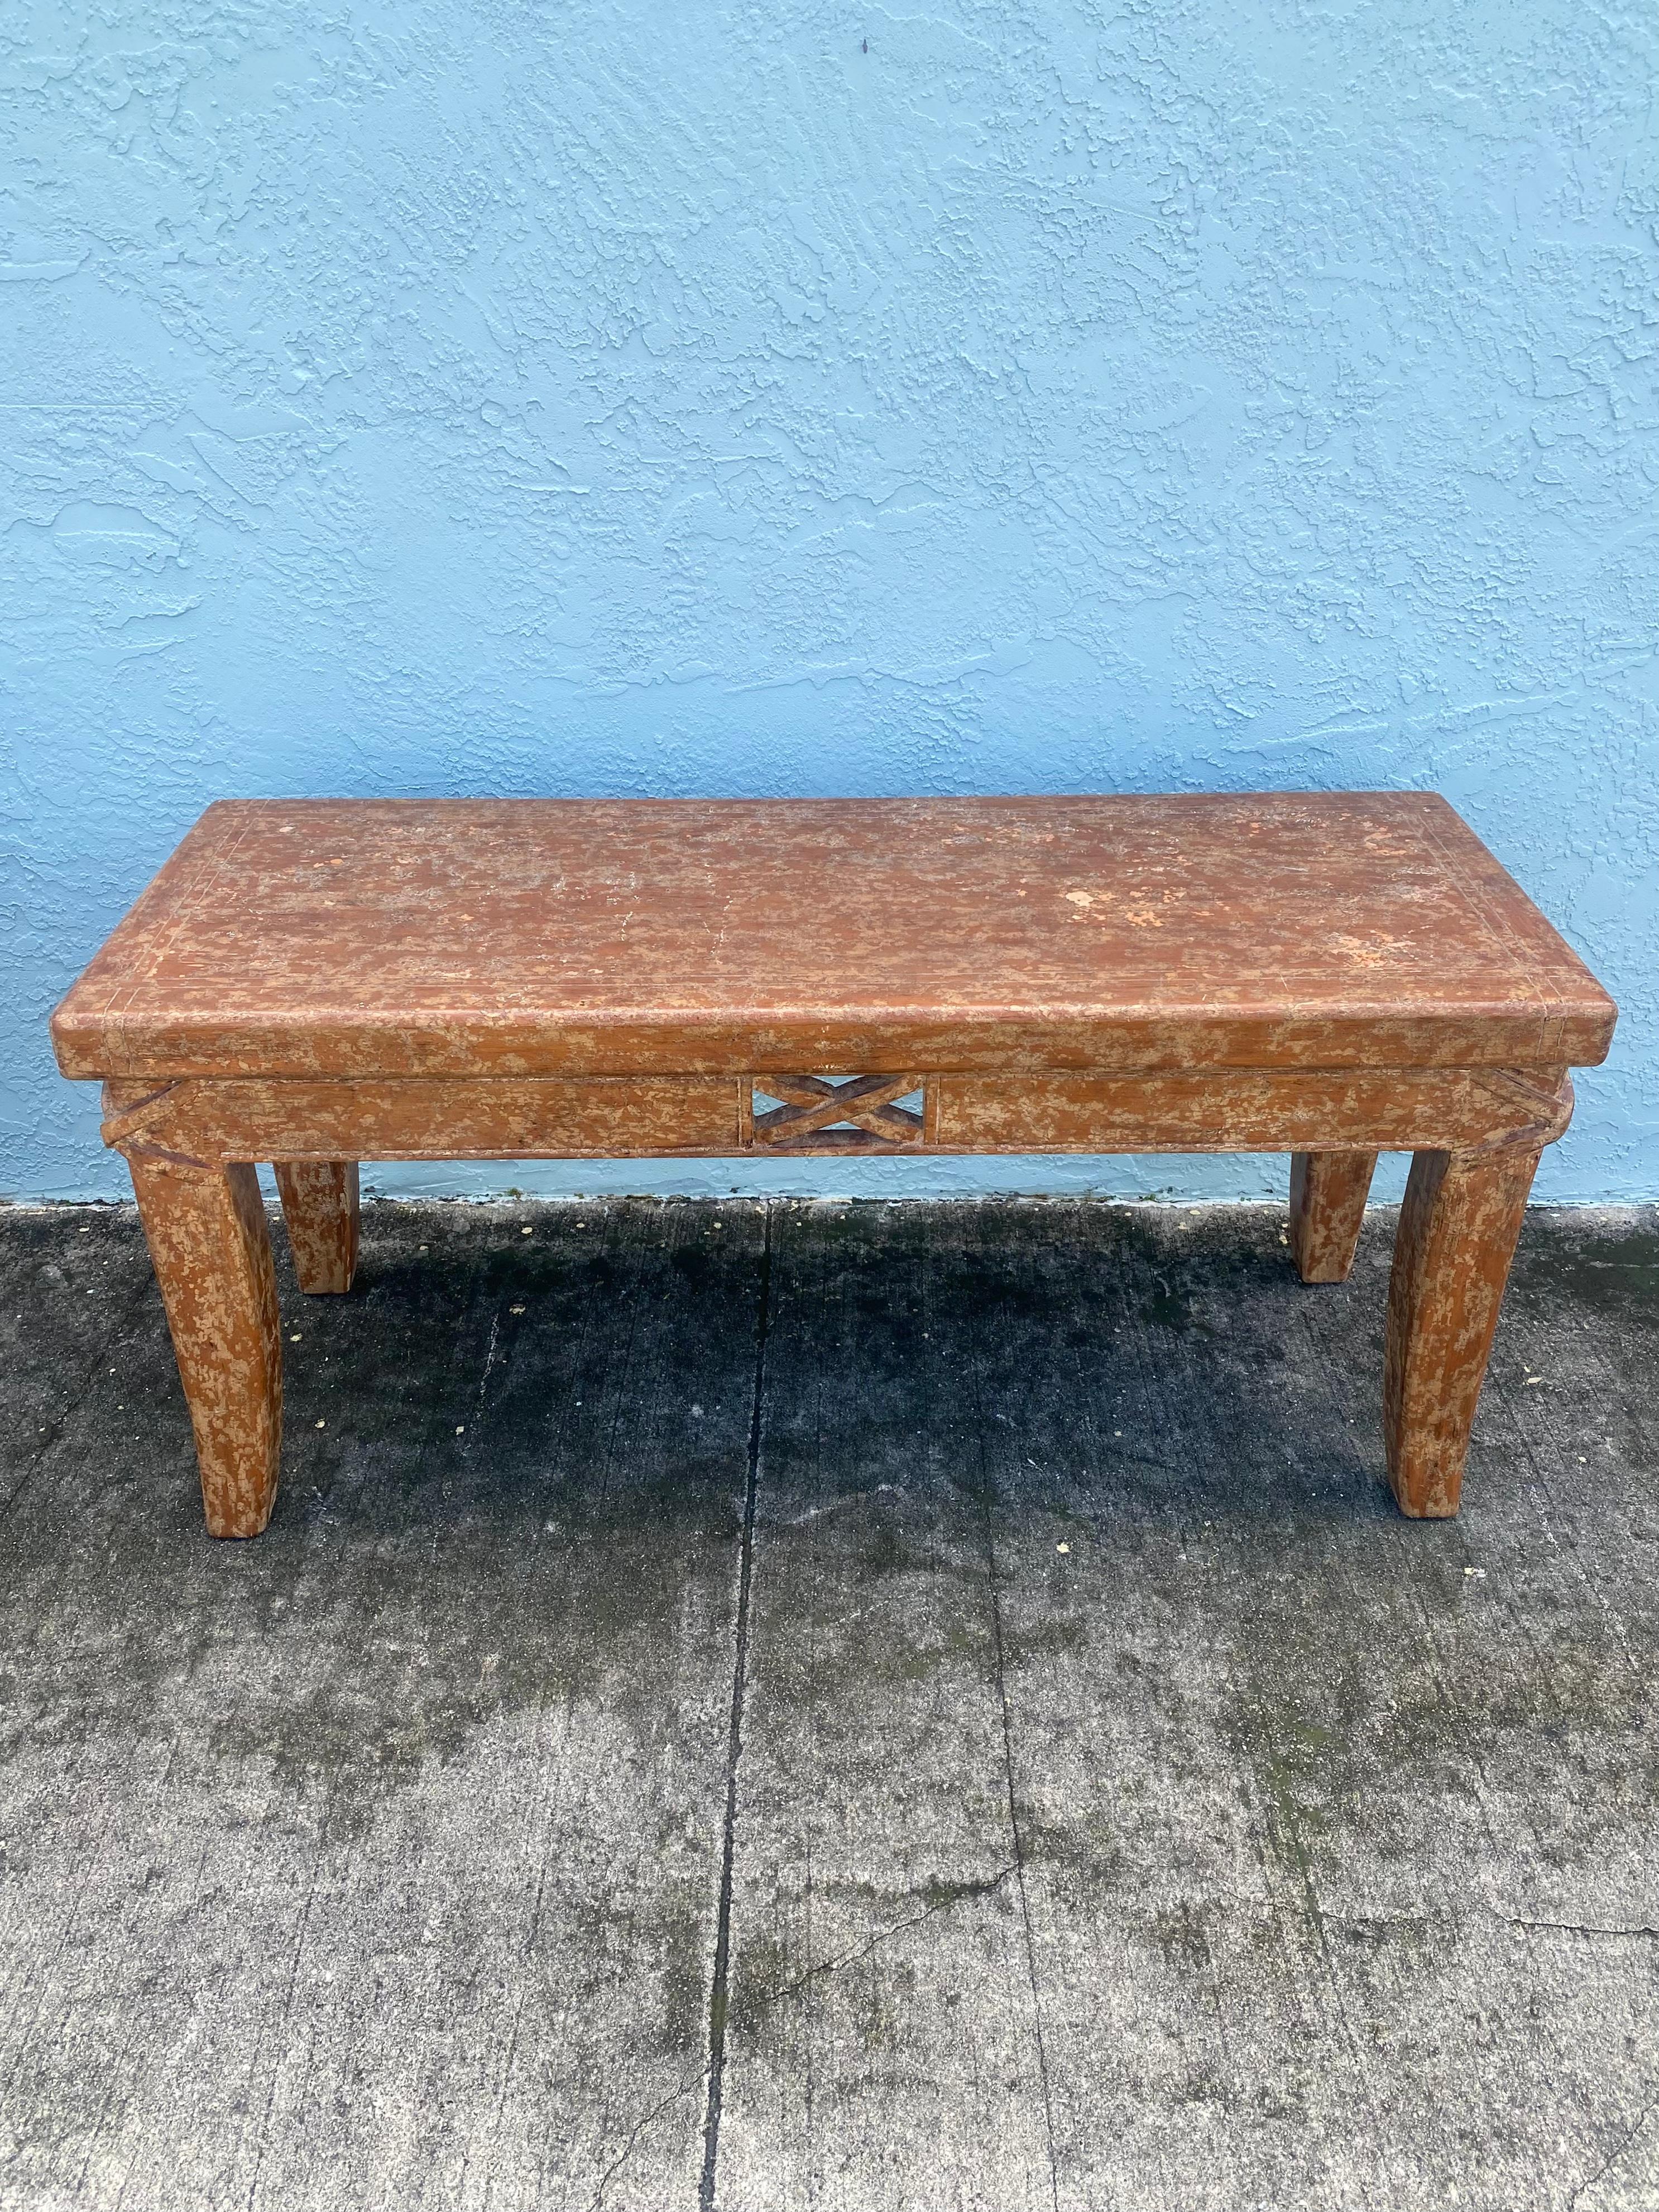 On offer on this occasion is one of the most stunning, table you could hope to find. This is an ultra-rare opportunity to acquire what is, unequivocally, the best of the best, it being a most spectacular and beautifully-presented table/desk.